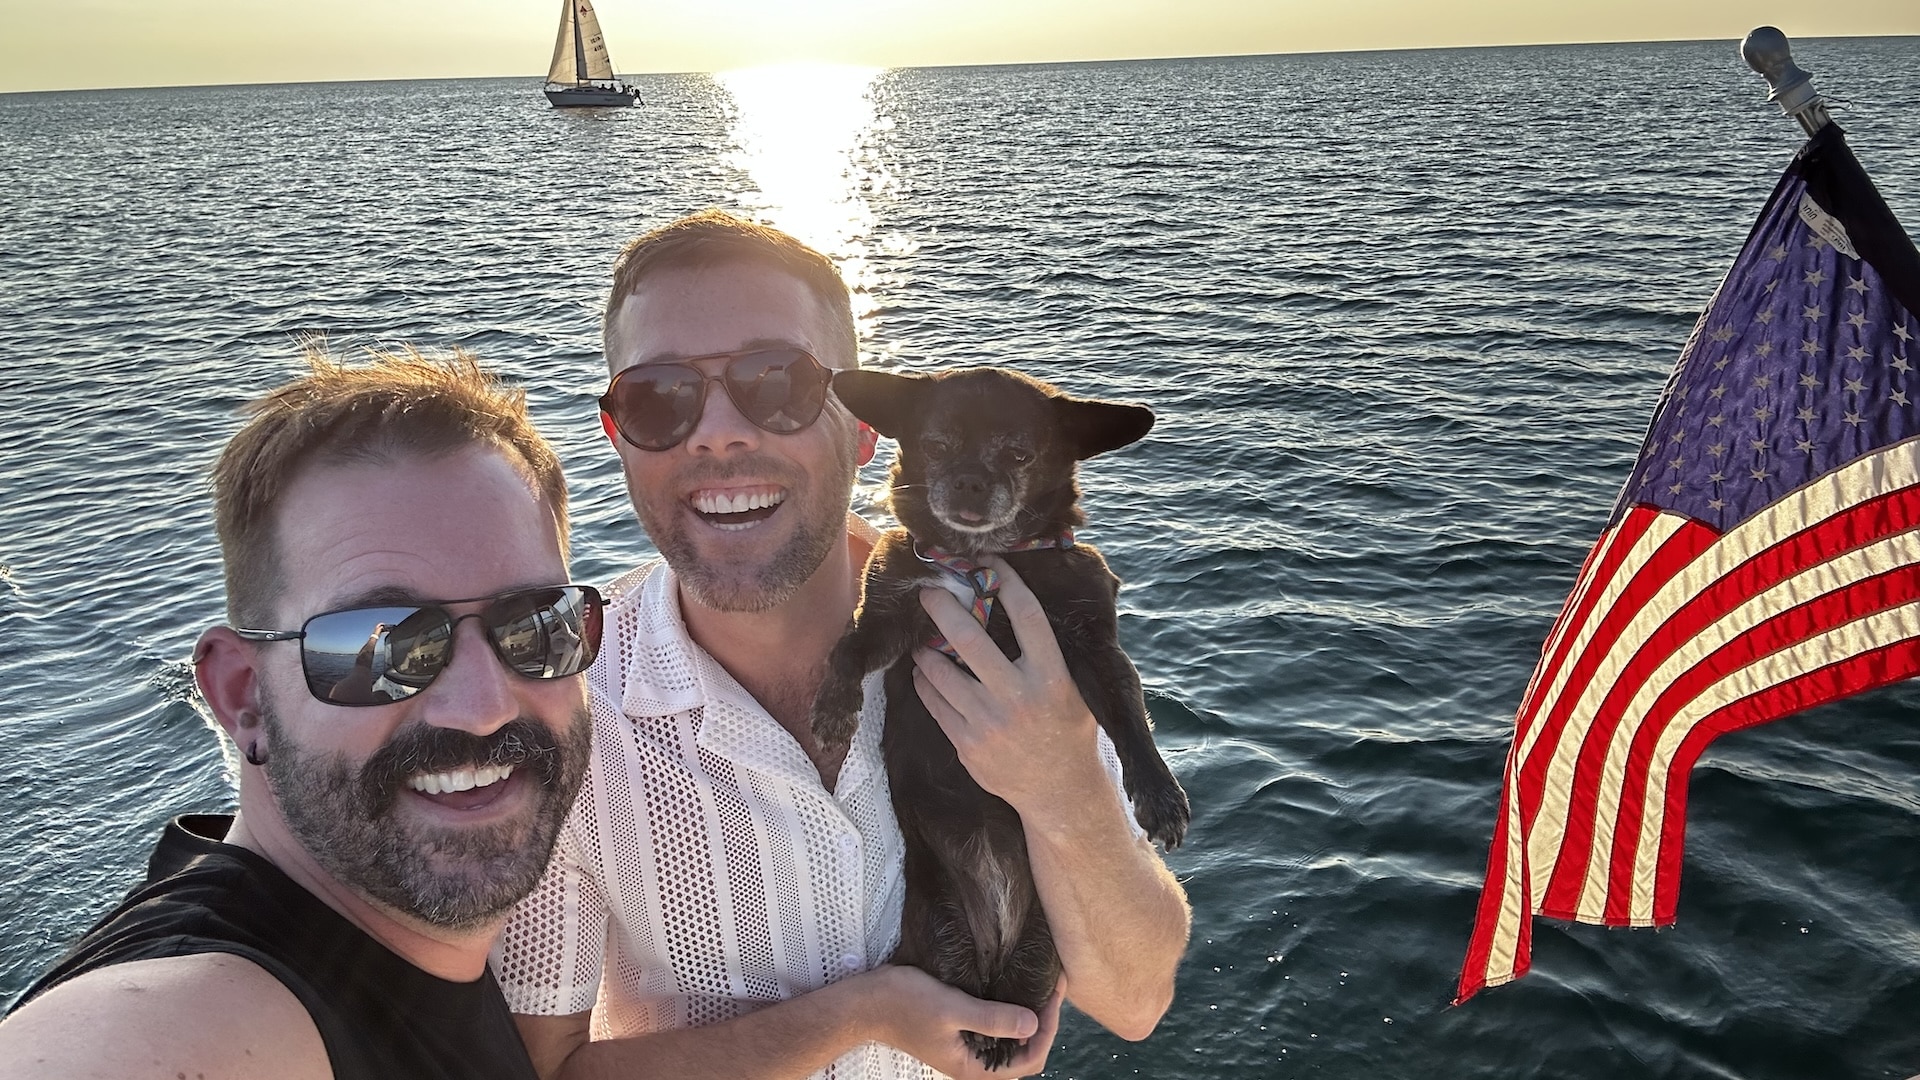 two men holding a small dog on a boat on Lake Michigan